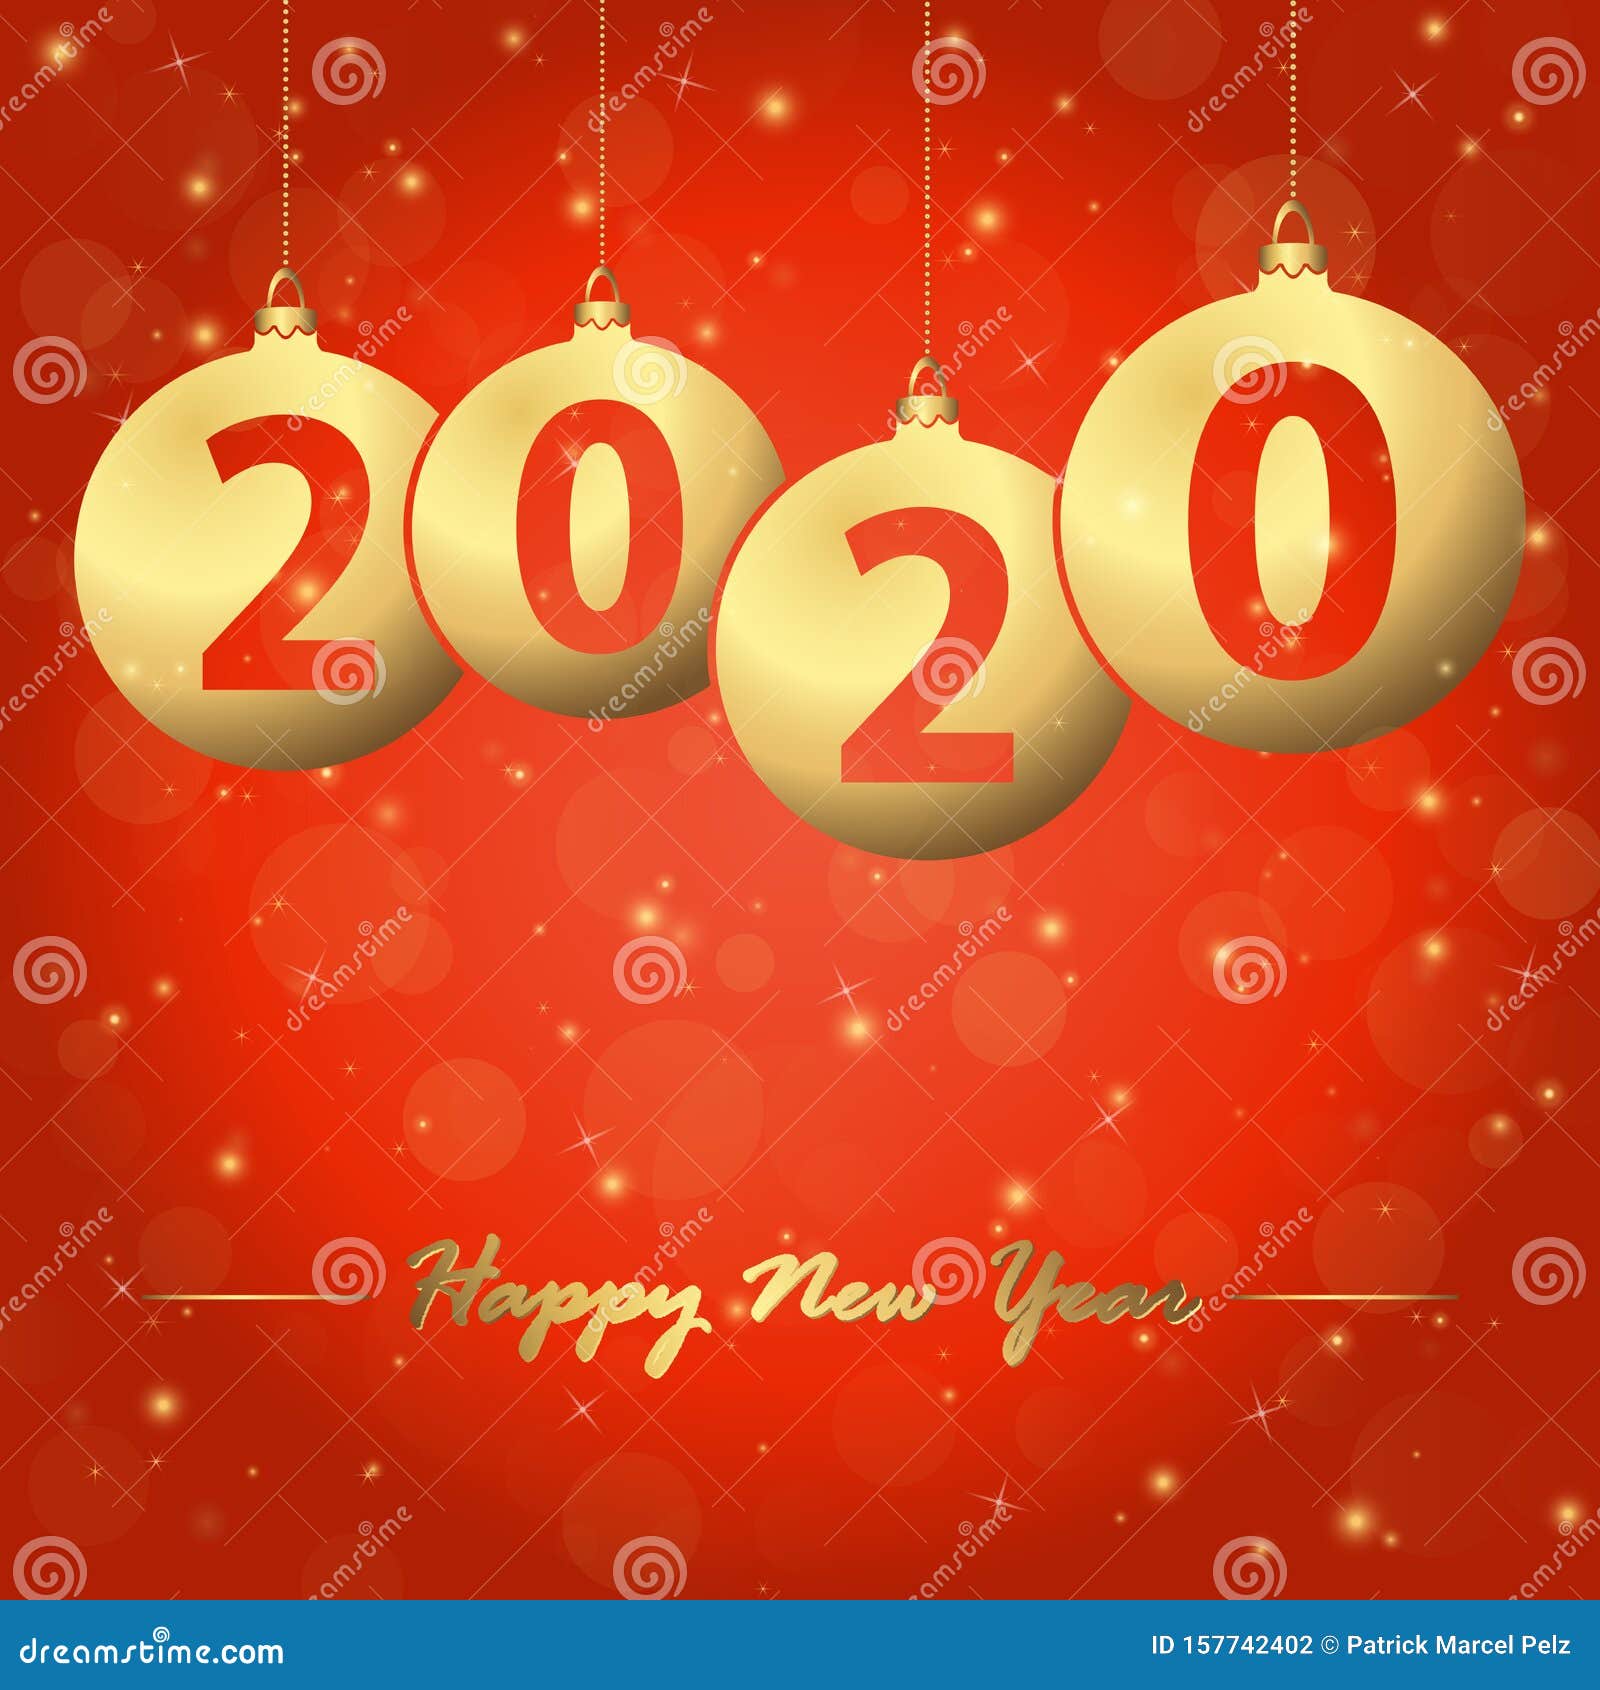 New Year 2020 Christmas Bubbles Stock Vector - Illustration of future, turn: 157742402